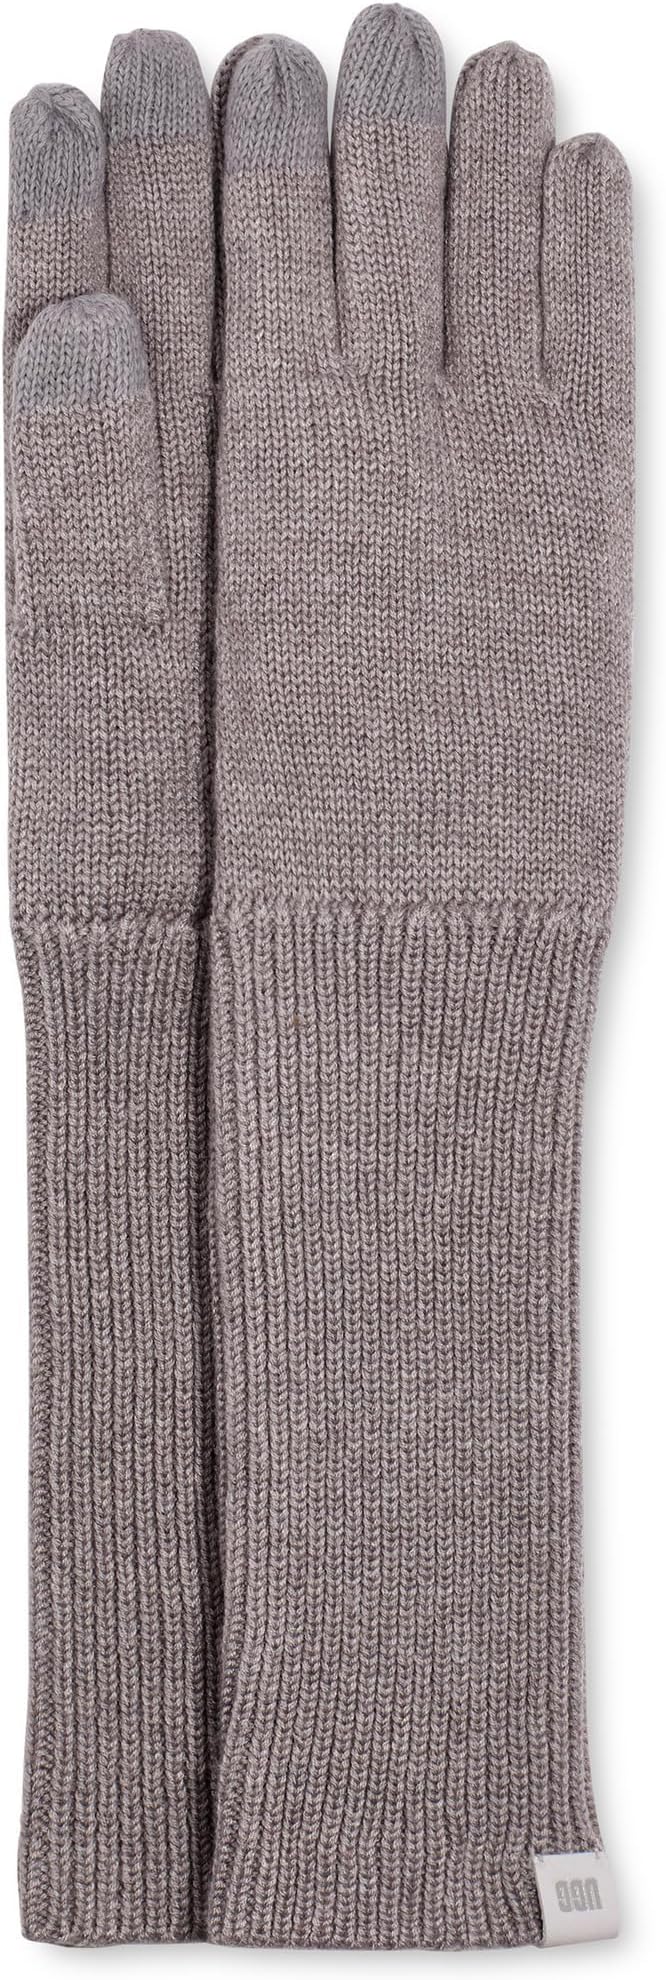 UGG Long Knit Gloves with Smart Conductive Palm and Fingers